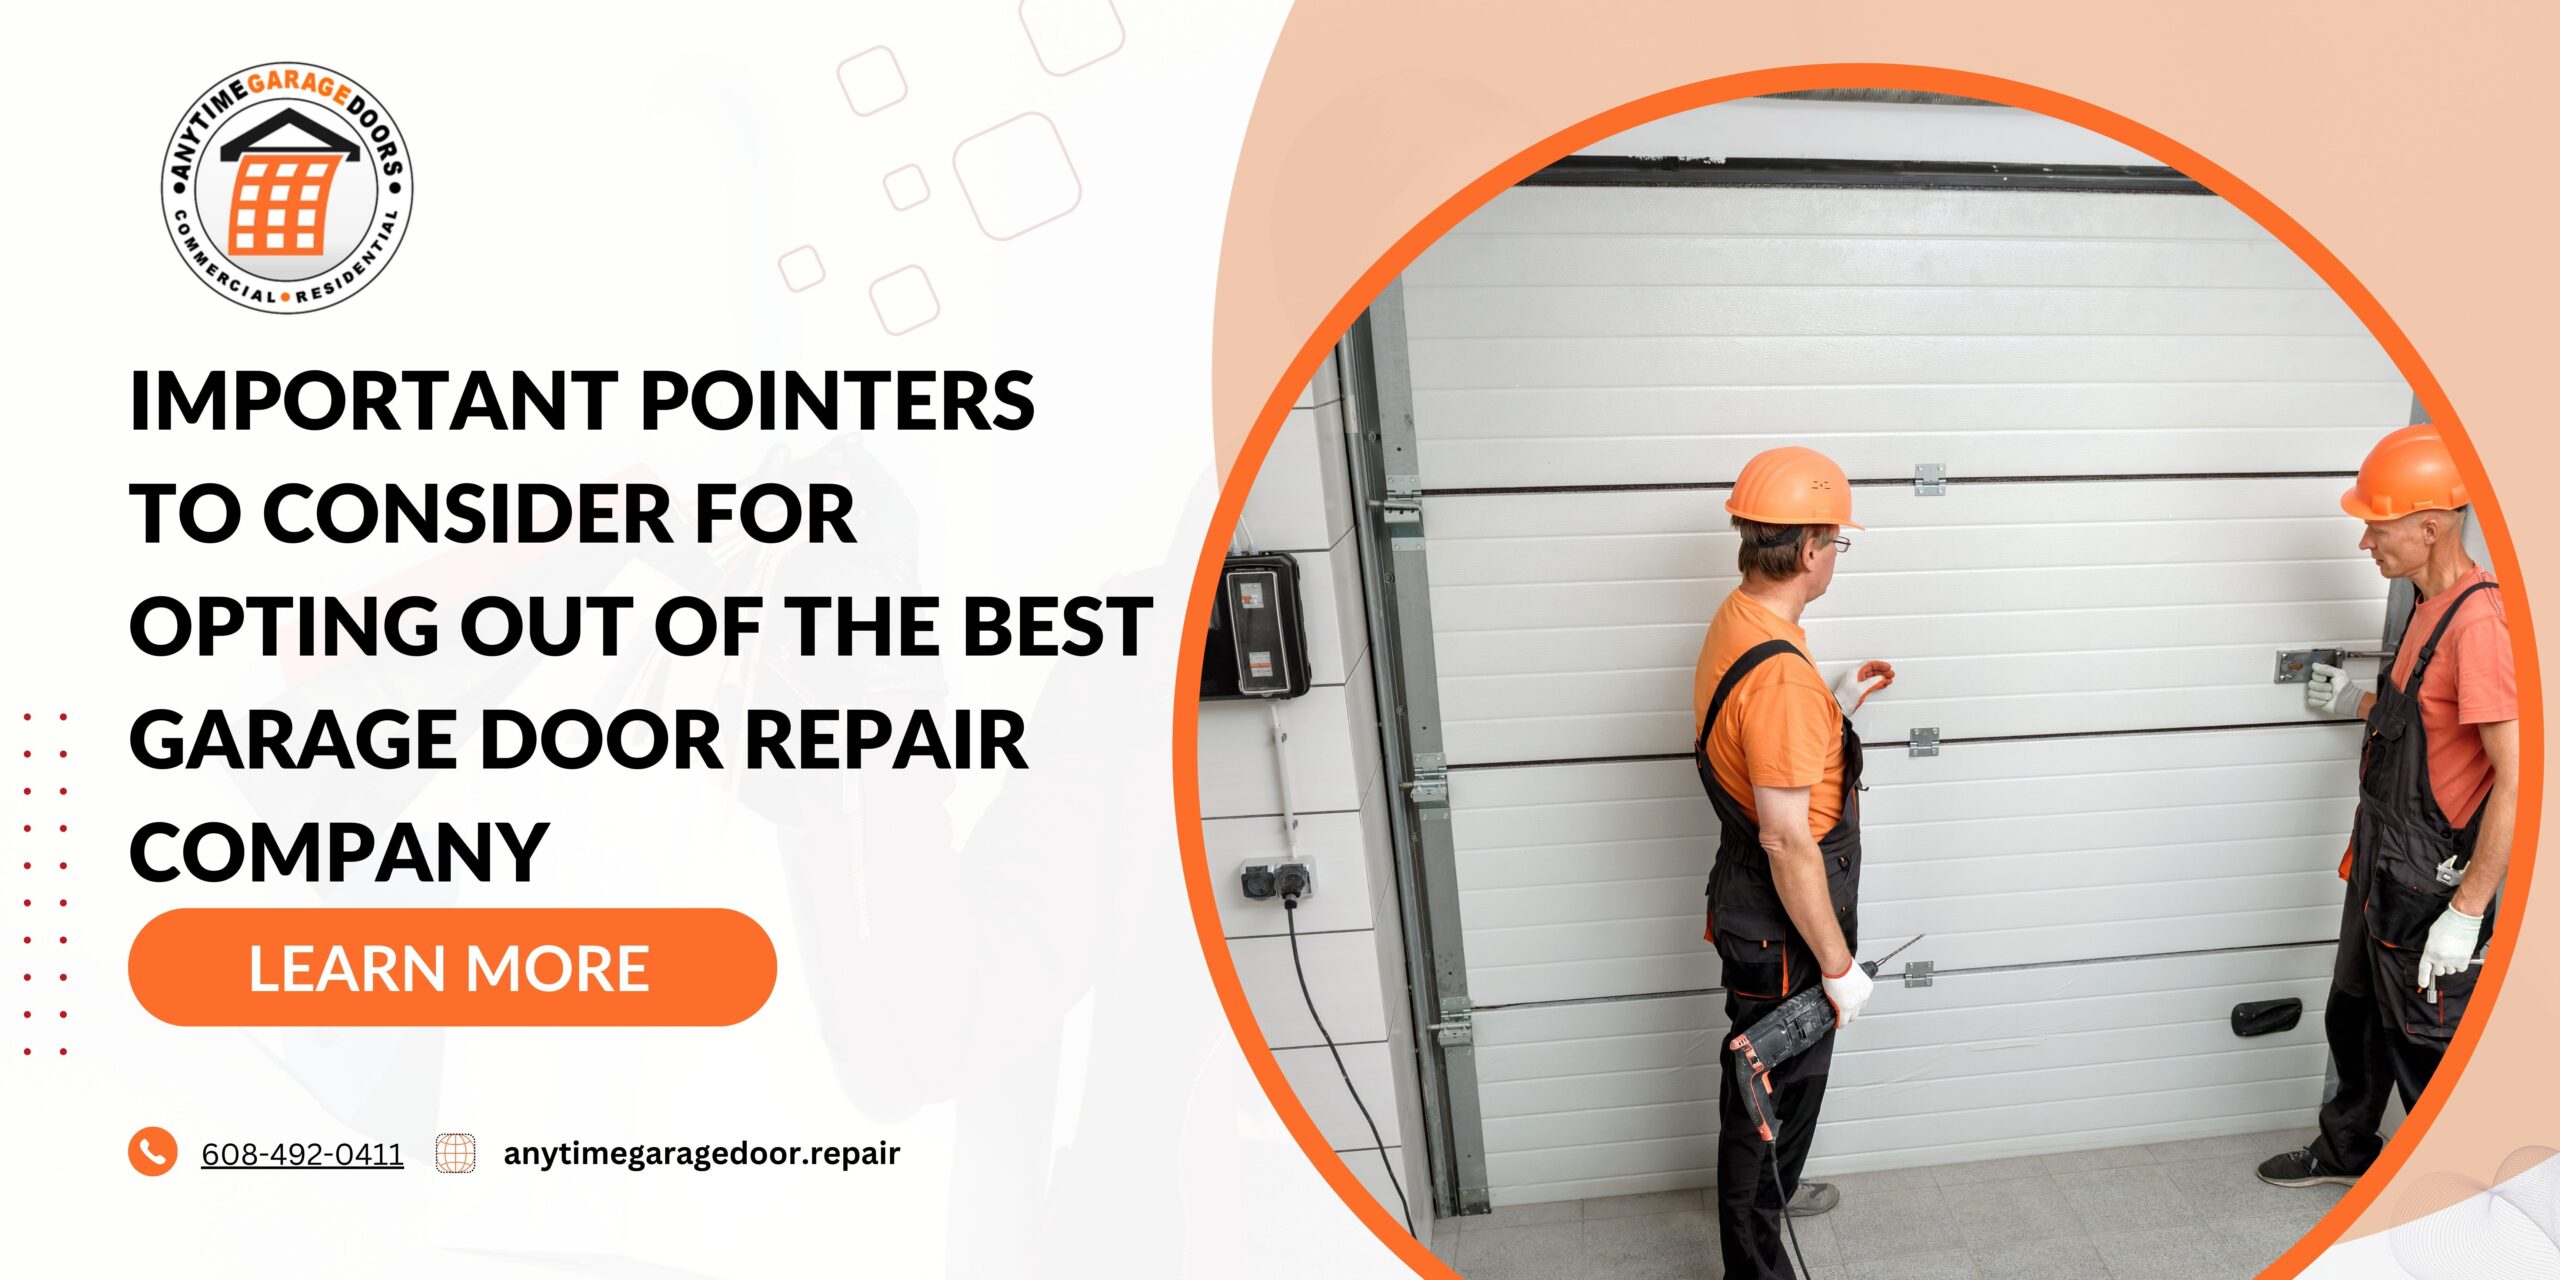 Important Pointers to Consider for Opting Out of the Best Garage Door Repair Company